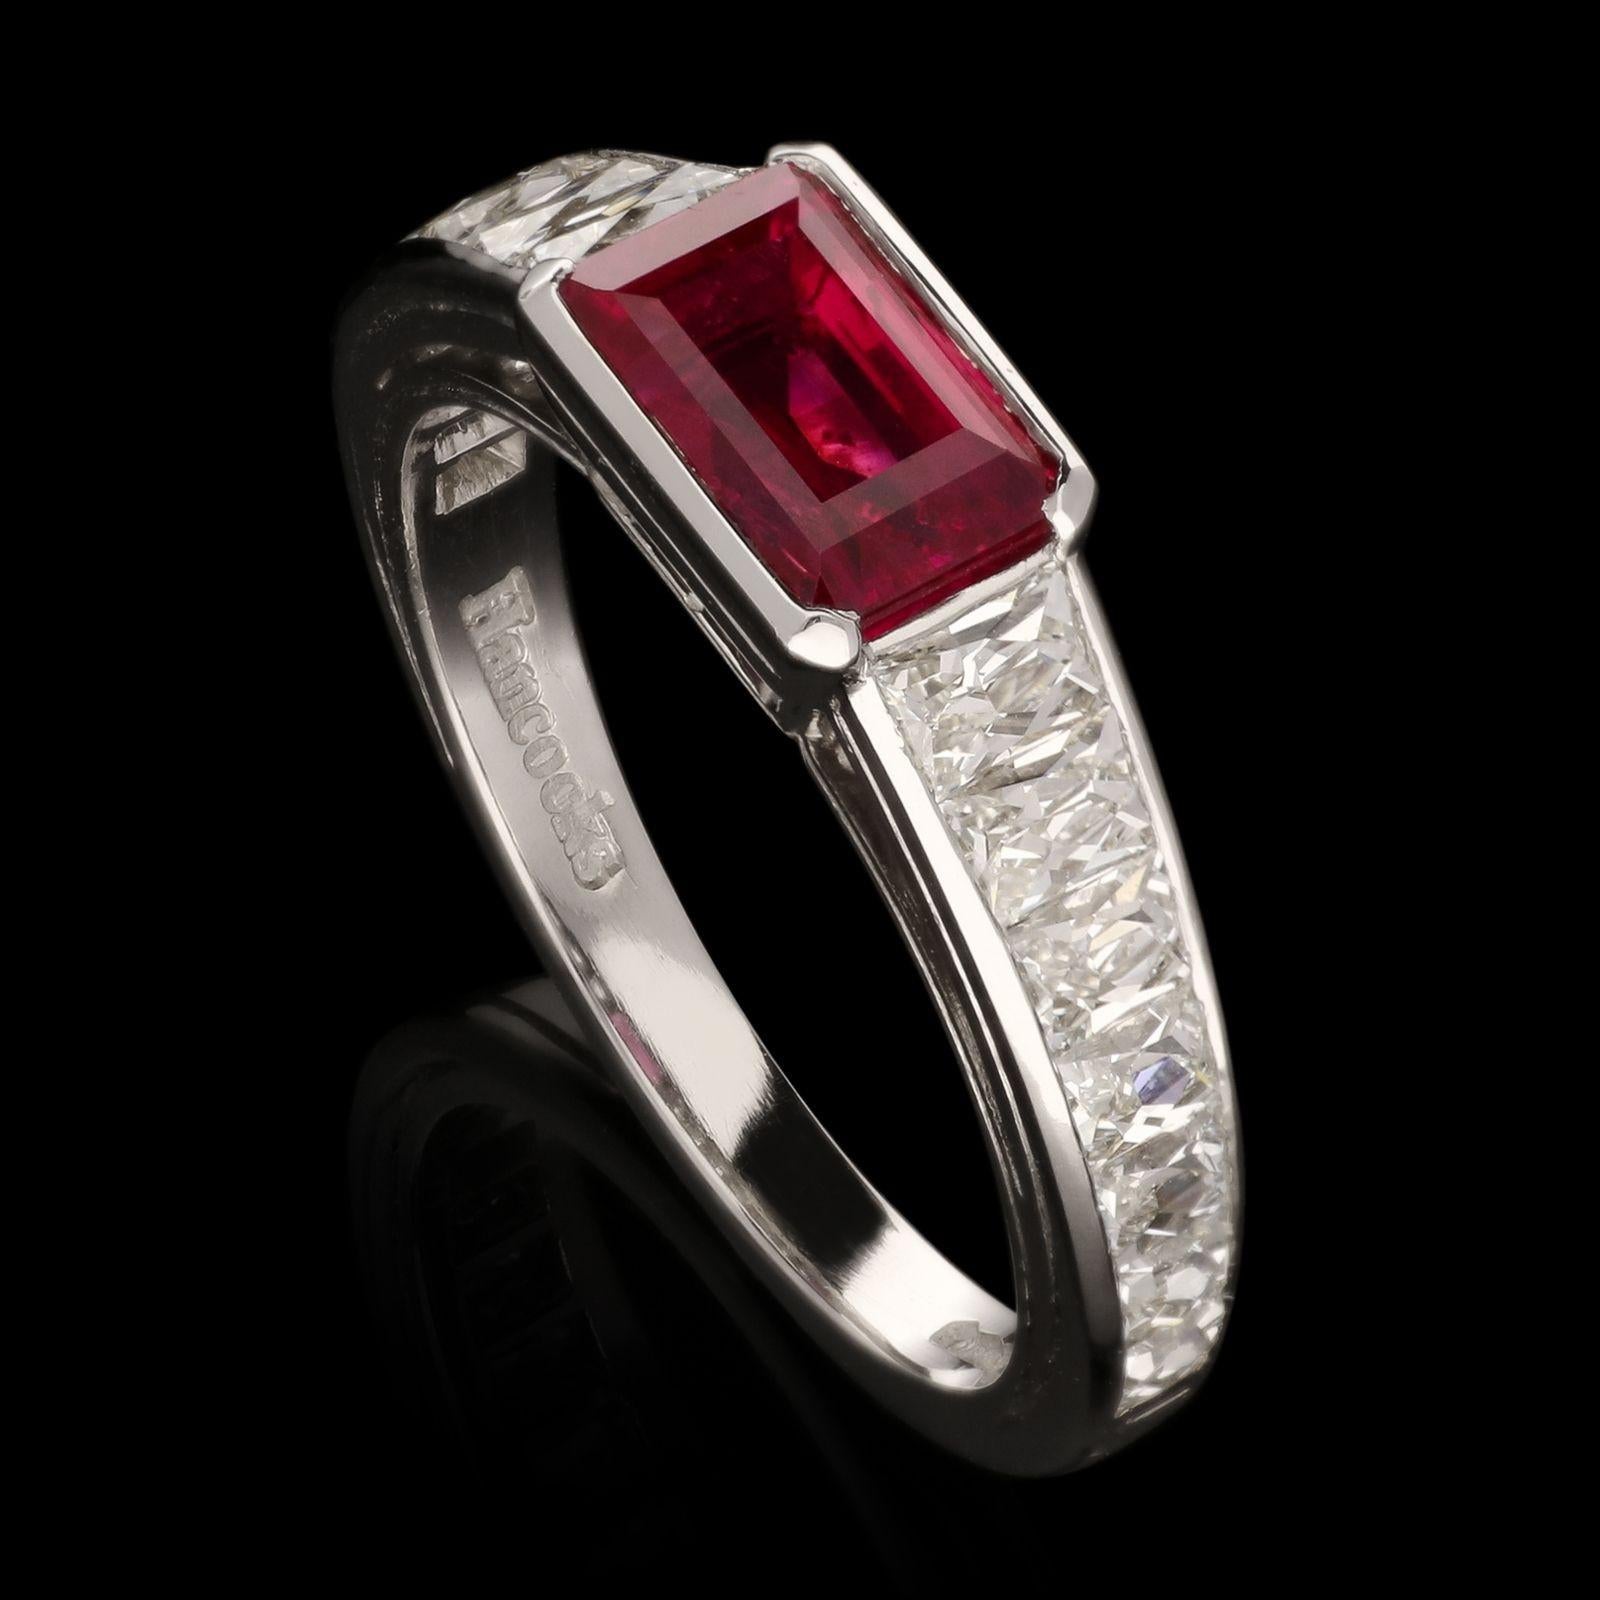 An unusual ruby and diamond ring by Hancocks horizontally set with a rectangular step-cut unheated Burmese ruby weighing 1.75ct in a platinum rub-over setting between shoulders channel set with tapering French-cut diamonds to a tapering square